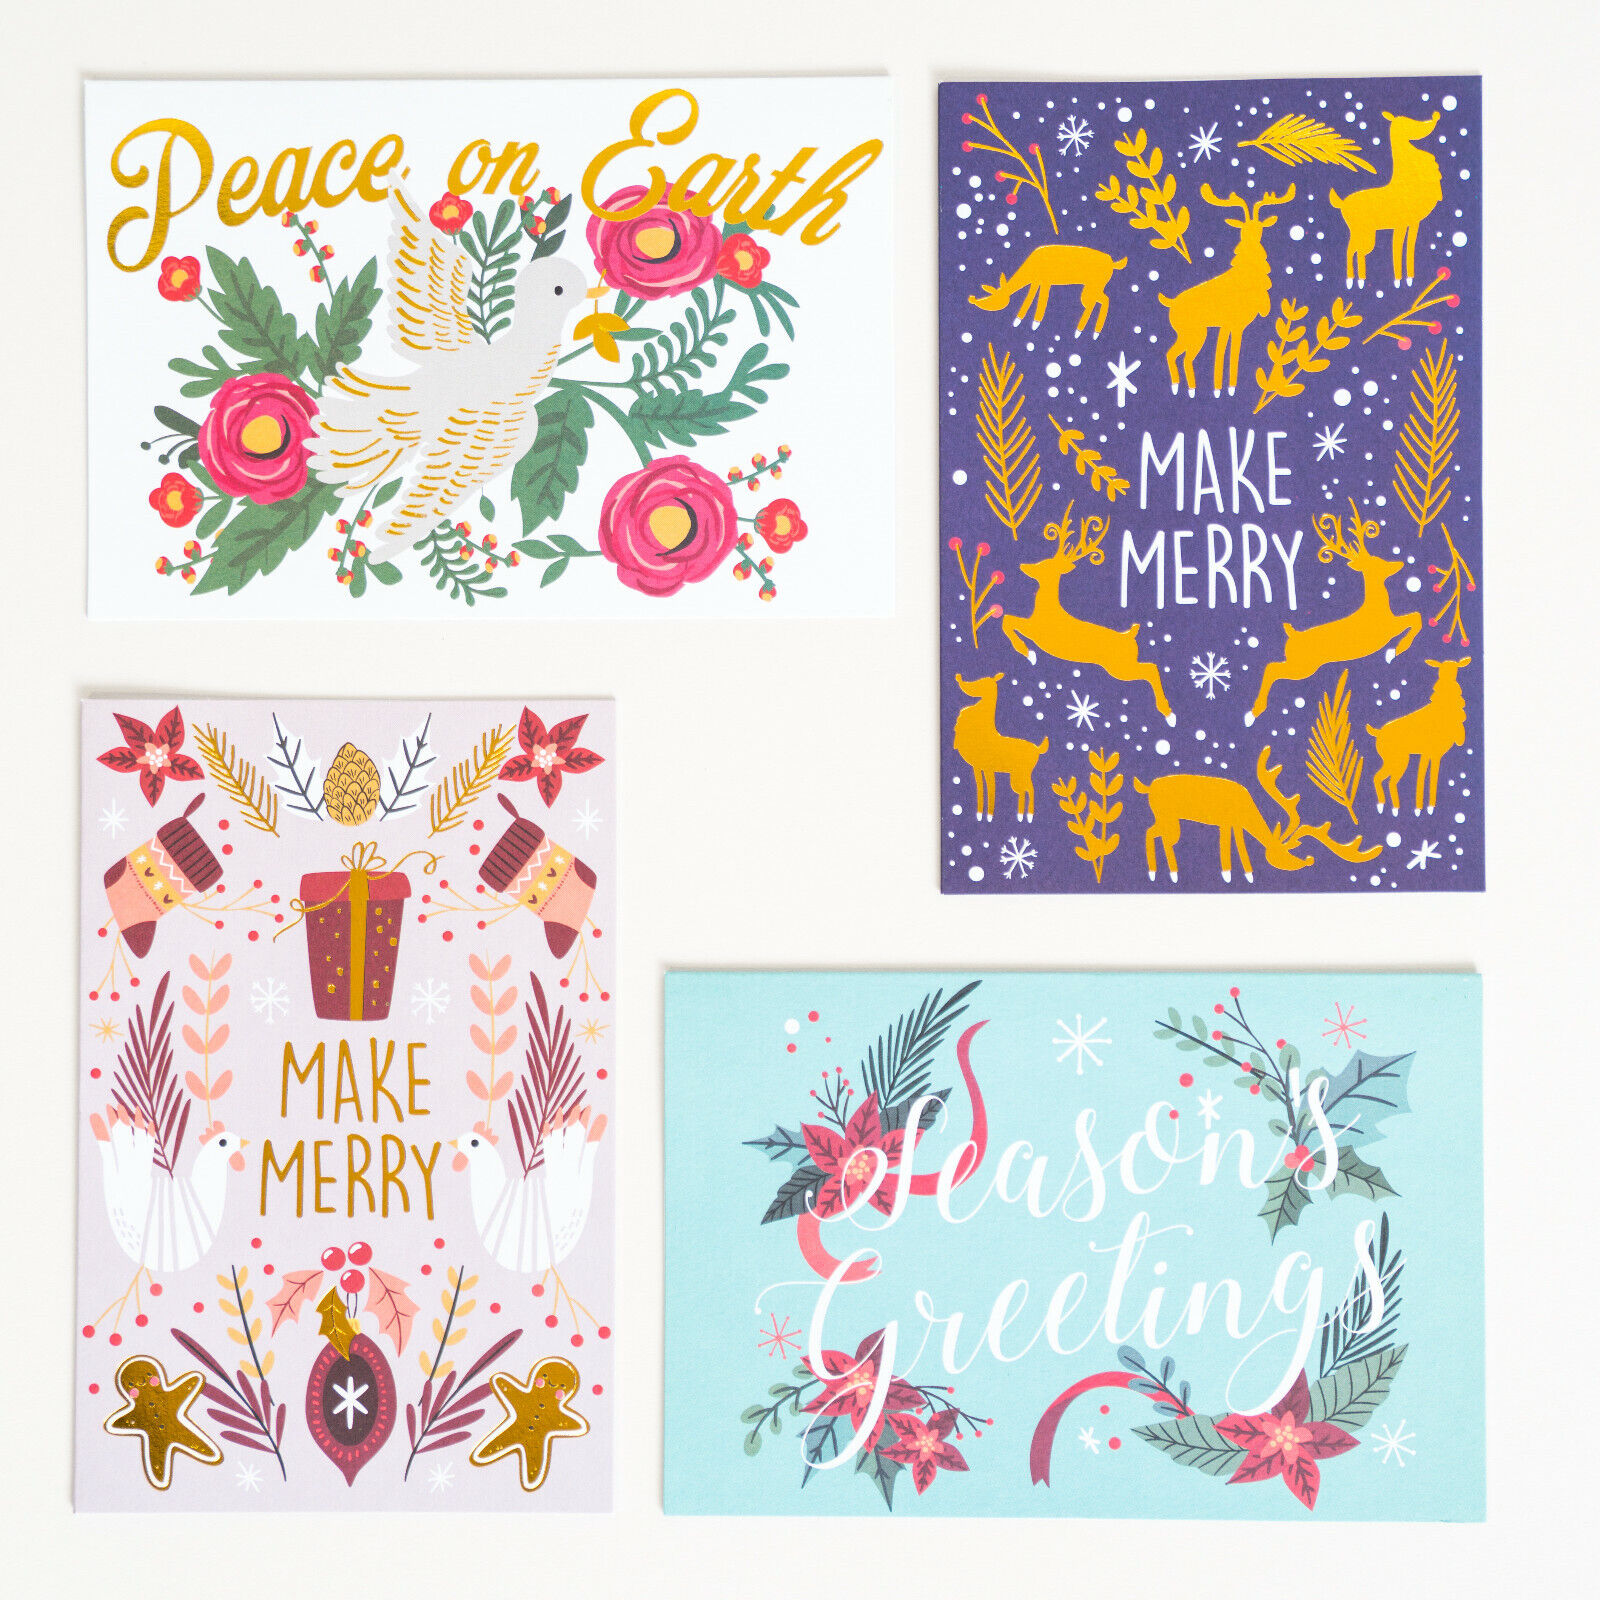 36 Pack Christmas Greeting Cards - 4 Assorted Winter Designs for Holiday